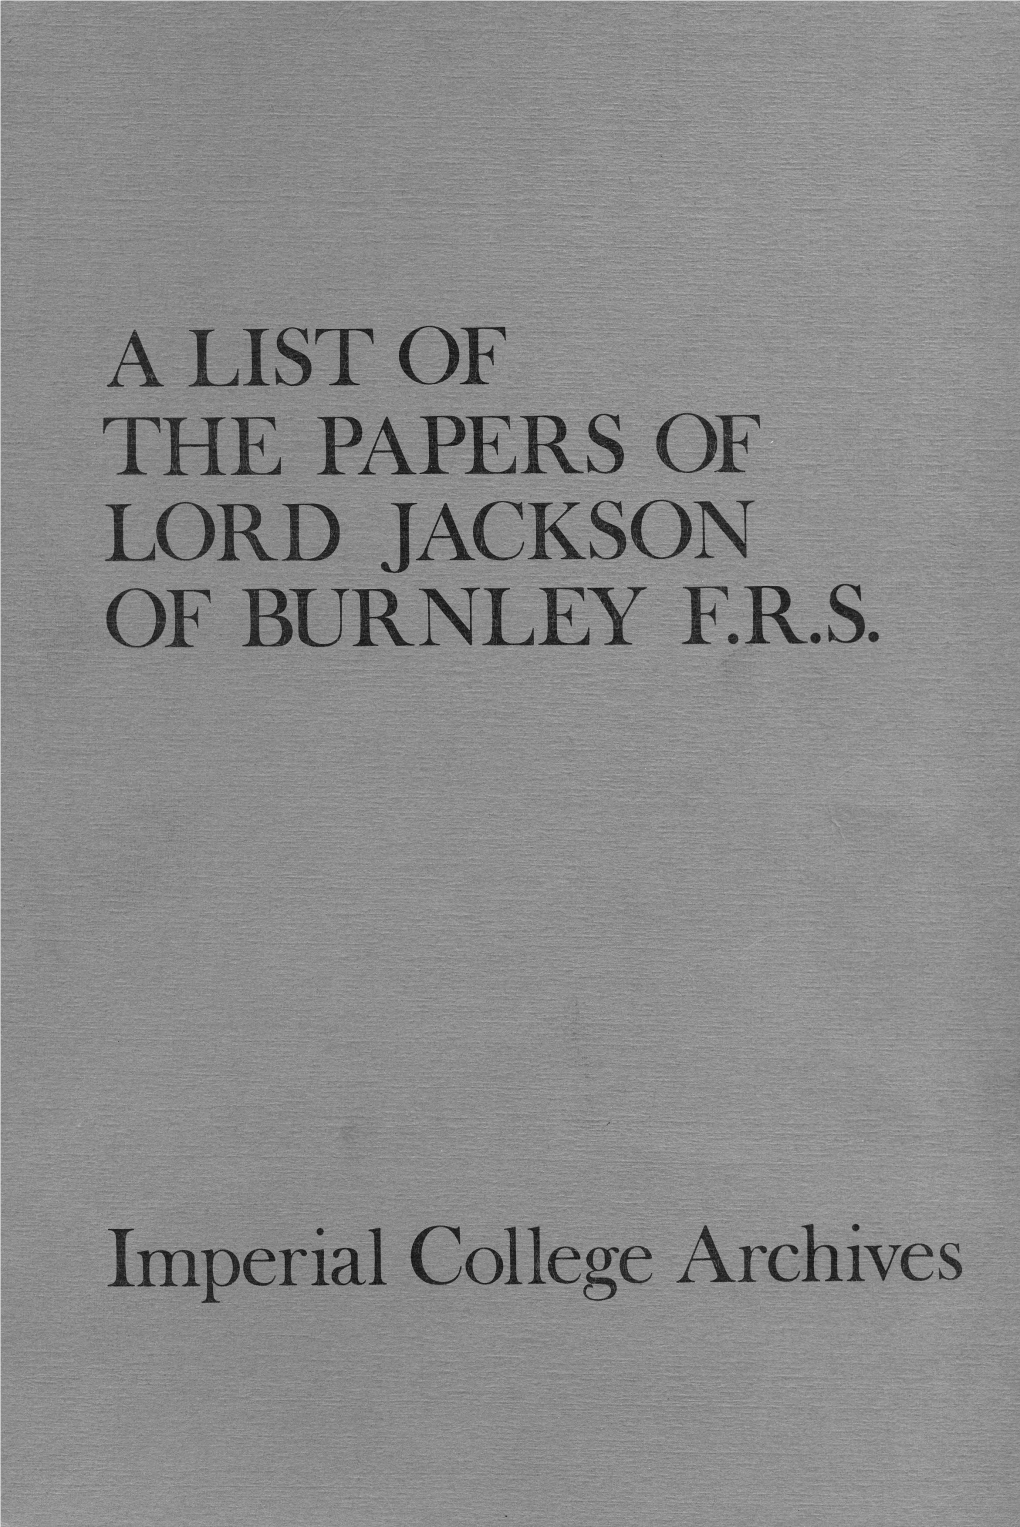 A List of . the Papers of Lord Jackson of Burnley F.R.S